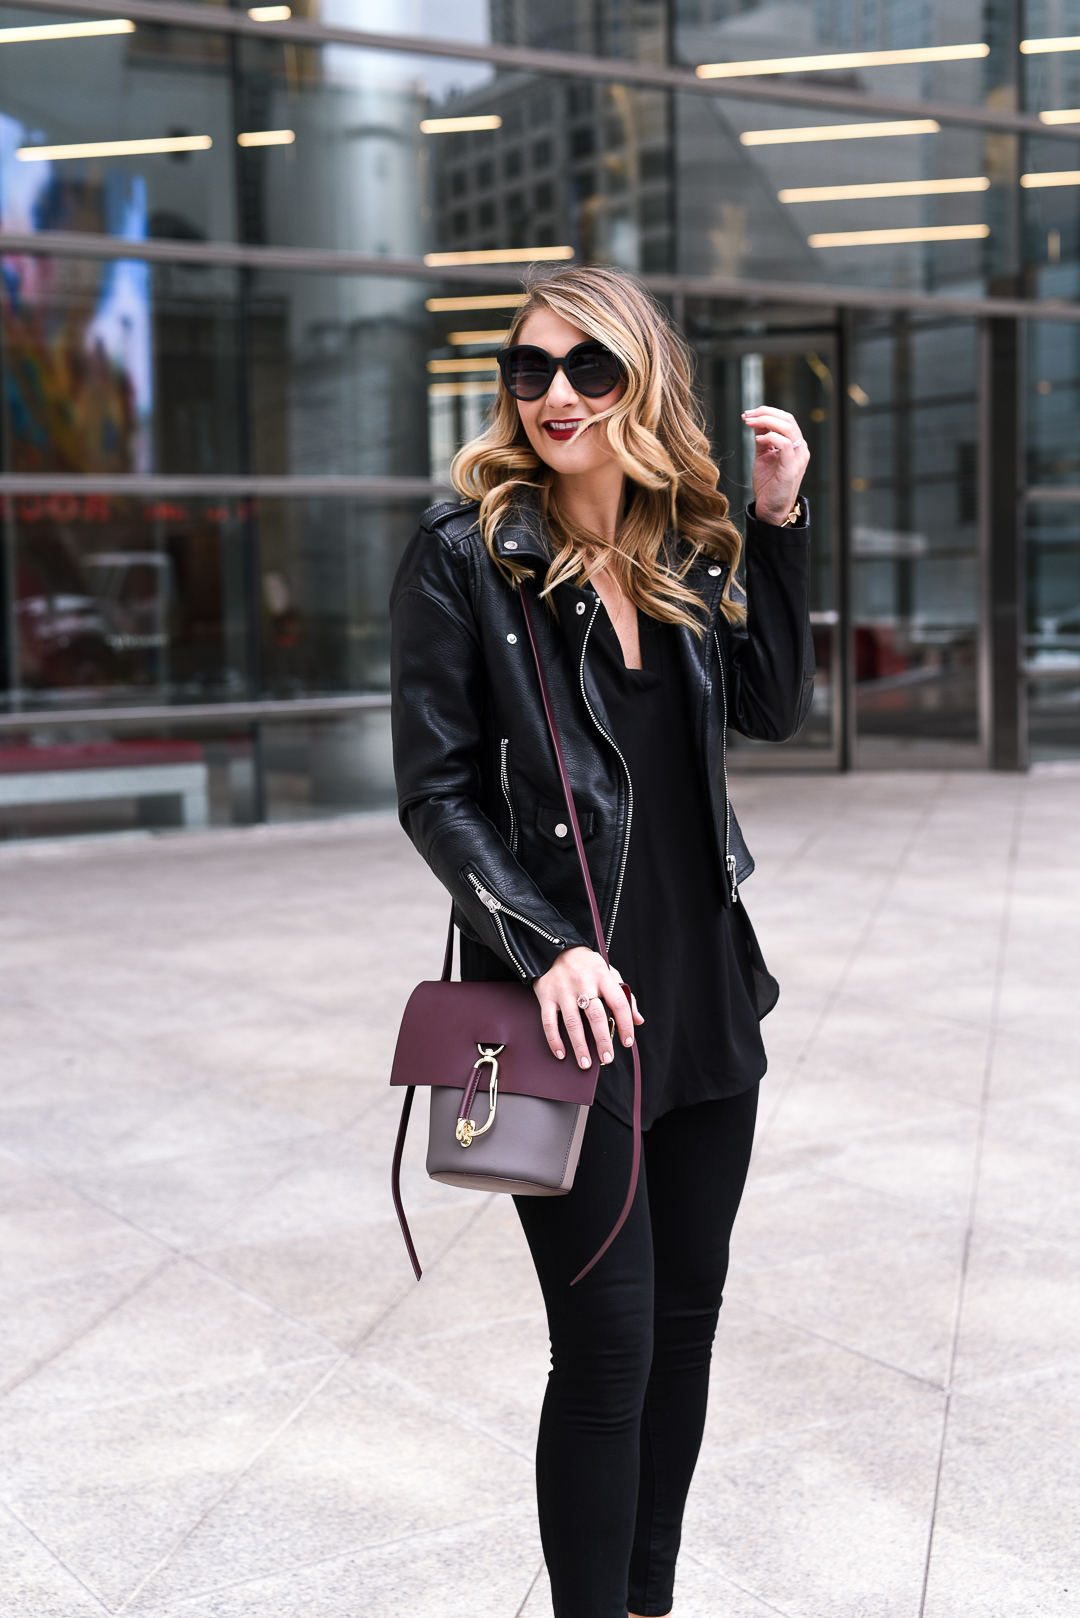 chic all black flattering outfit